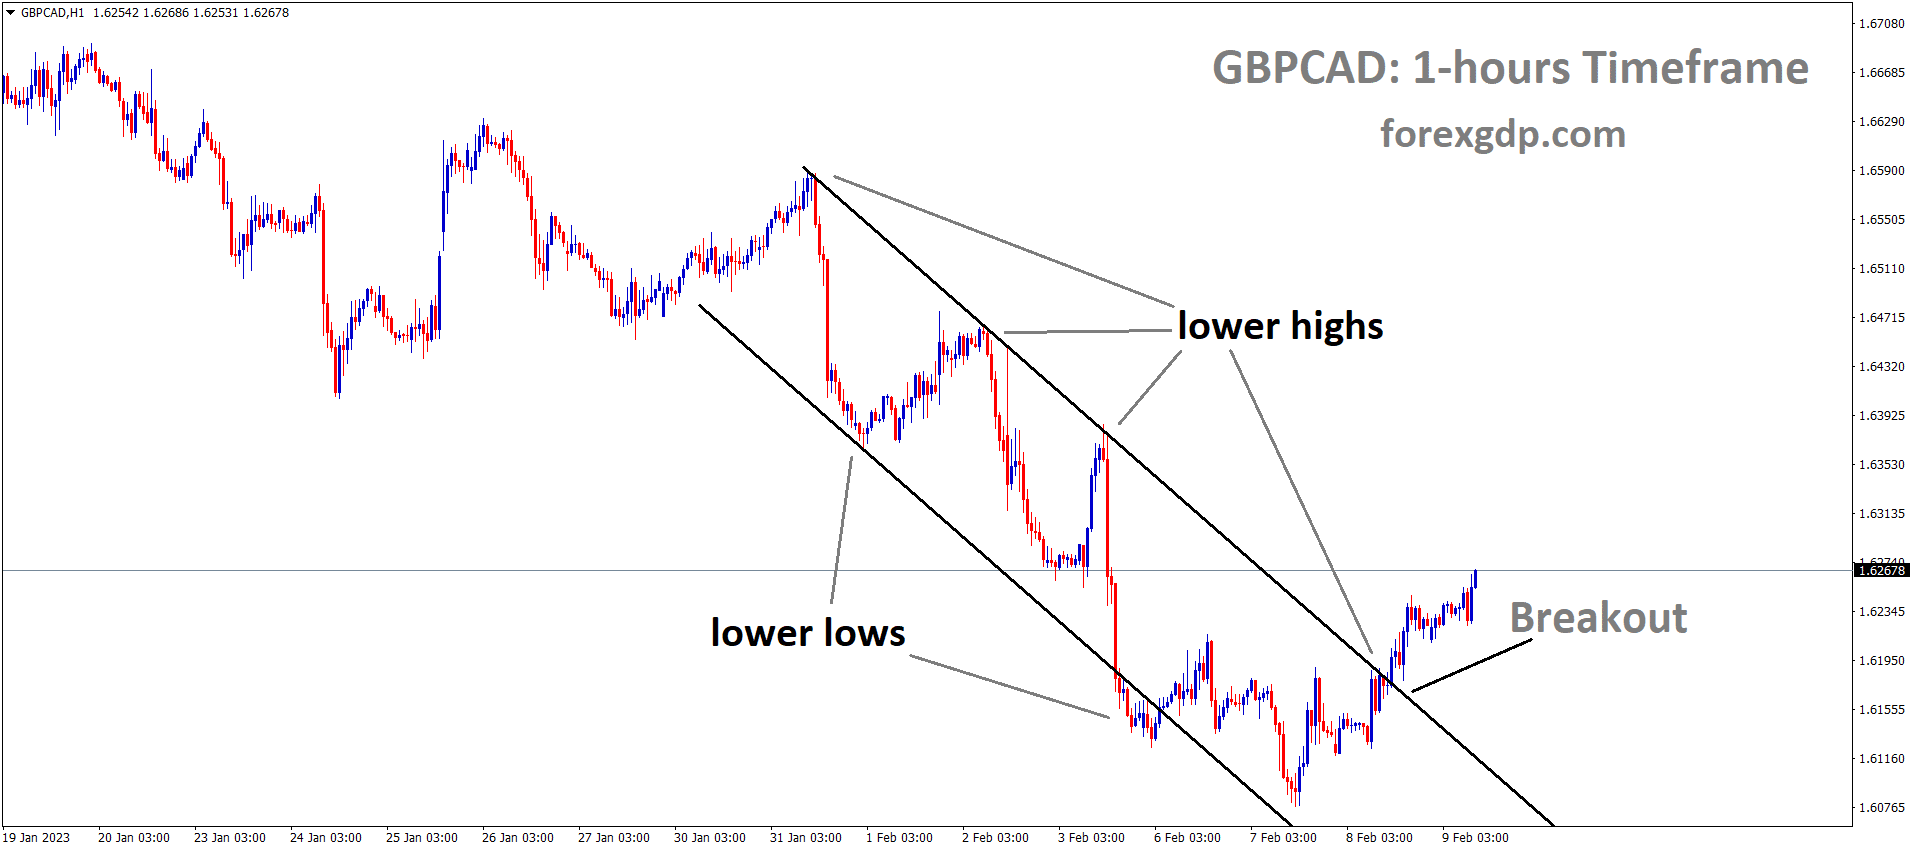 GBPCAD H1 TF Analysis Market is moving in the Descending channel and the market has broken the lower high area of the channel